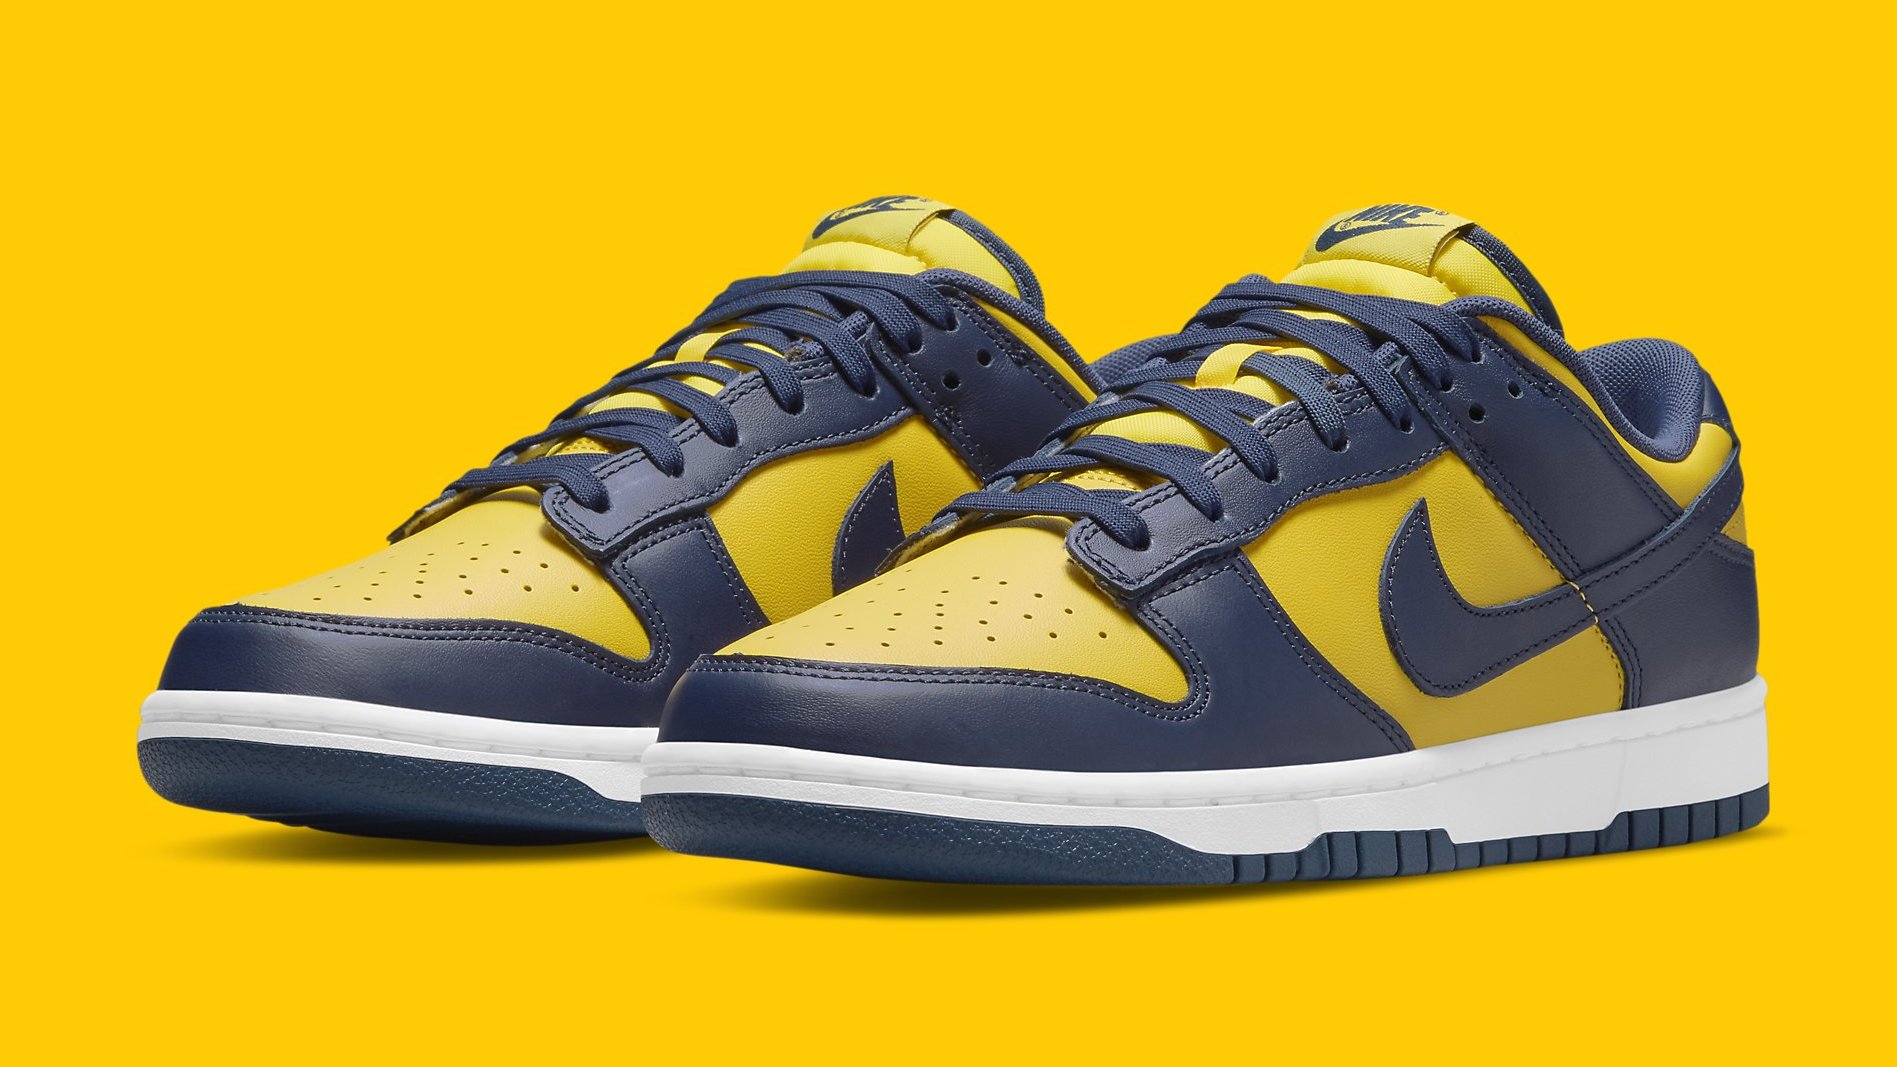 Sneakers Release – Nike Dunk Low “Michigan” and “Team  Green” Colorways Out